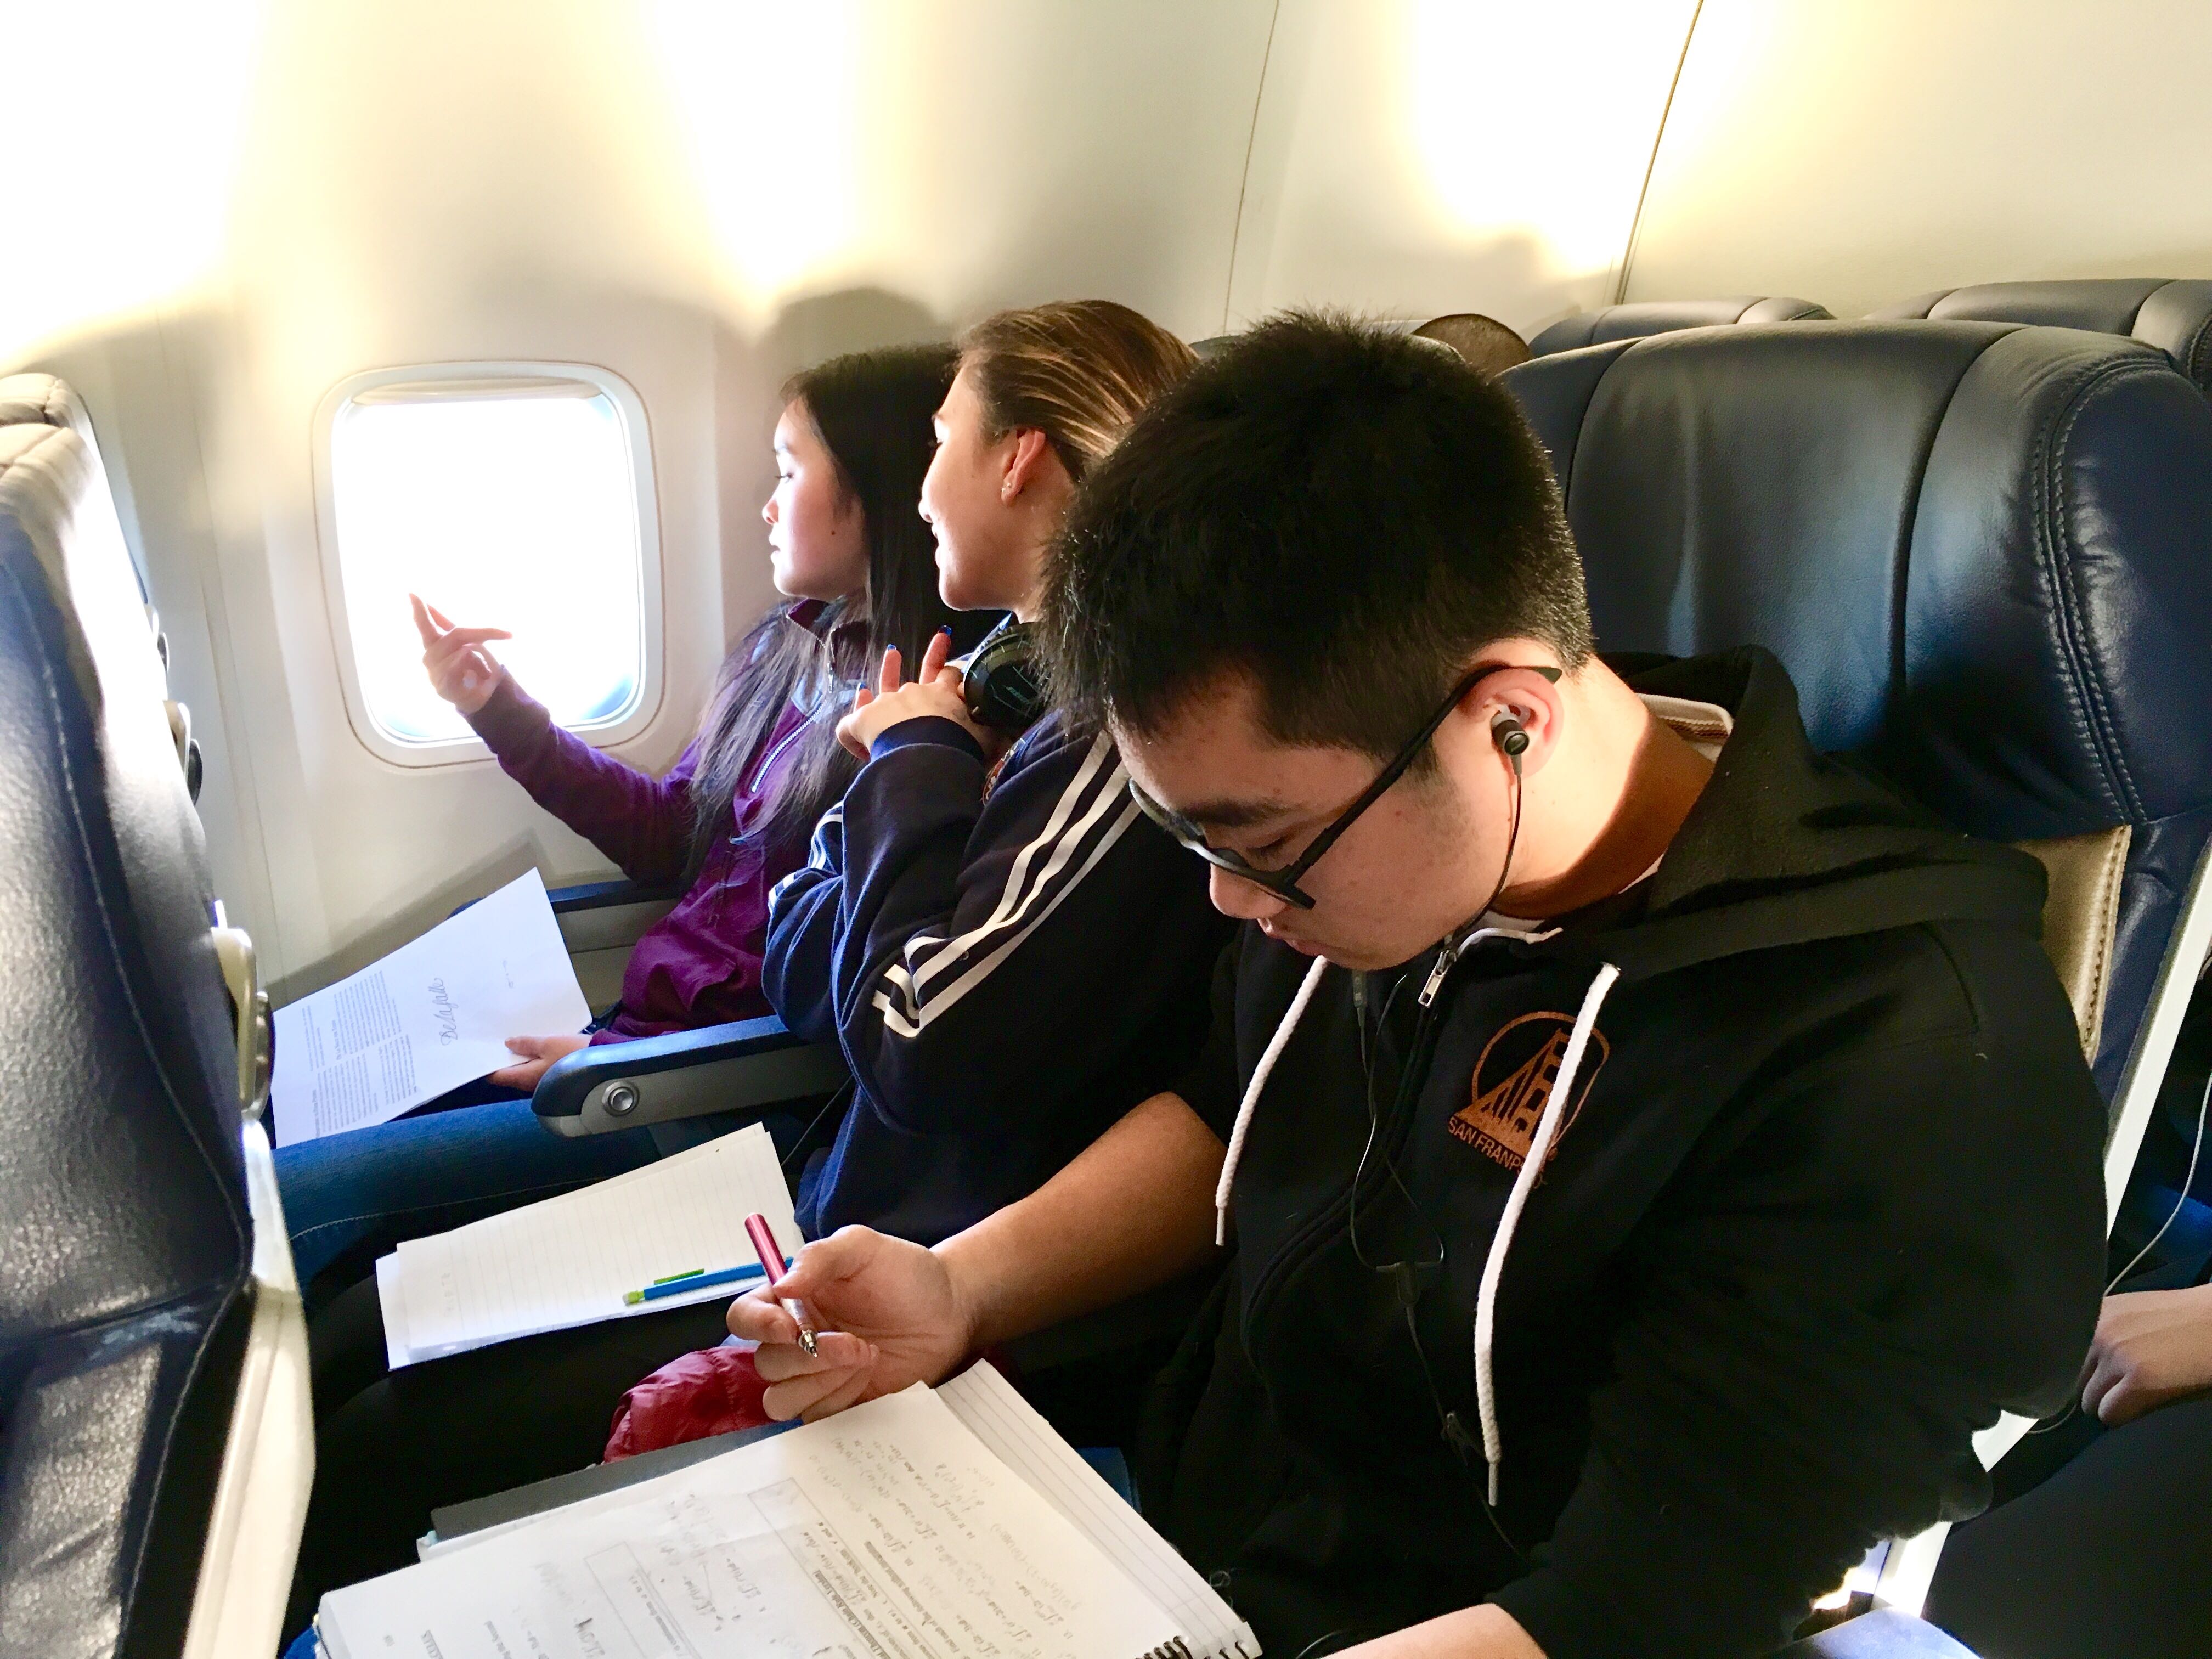 kids studying on the plane